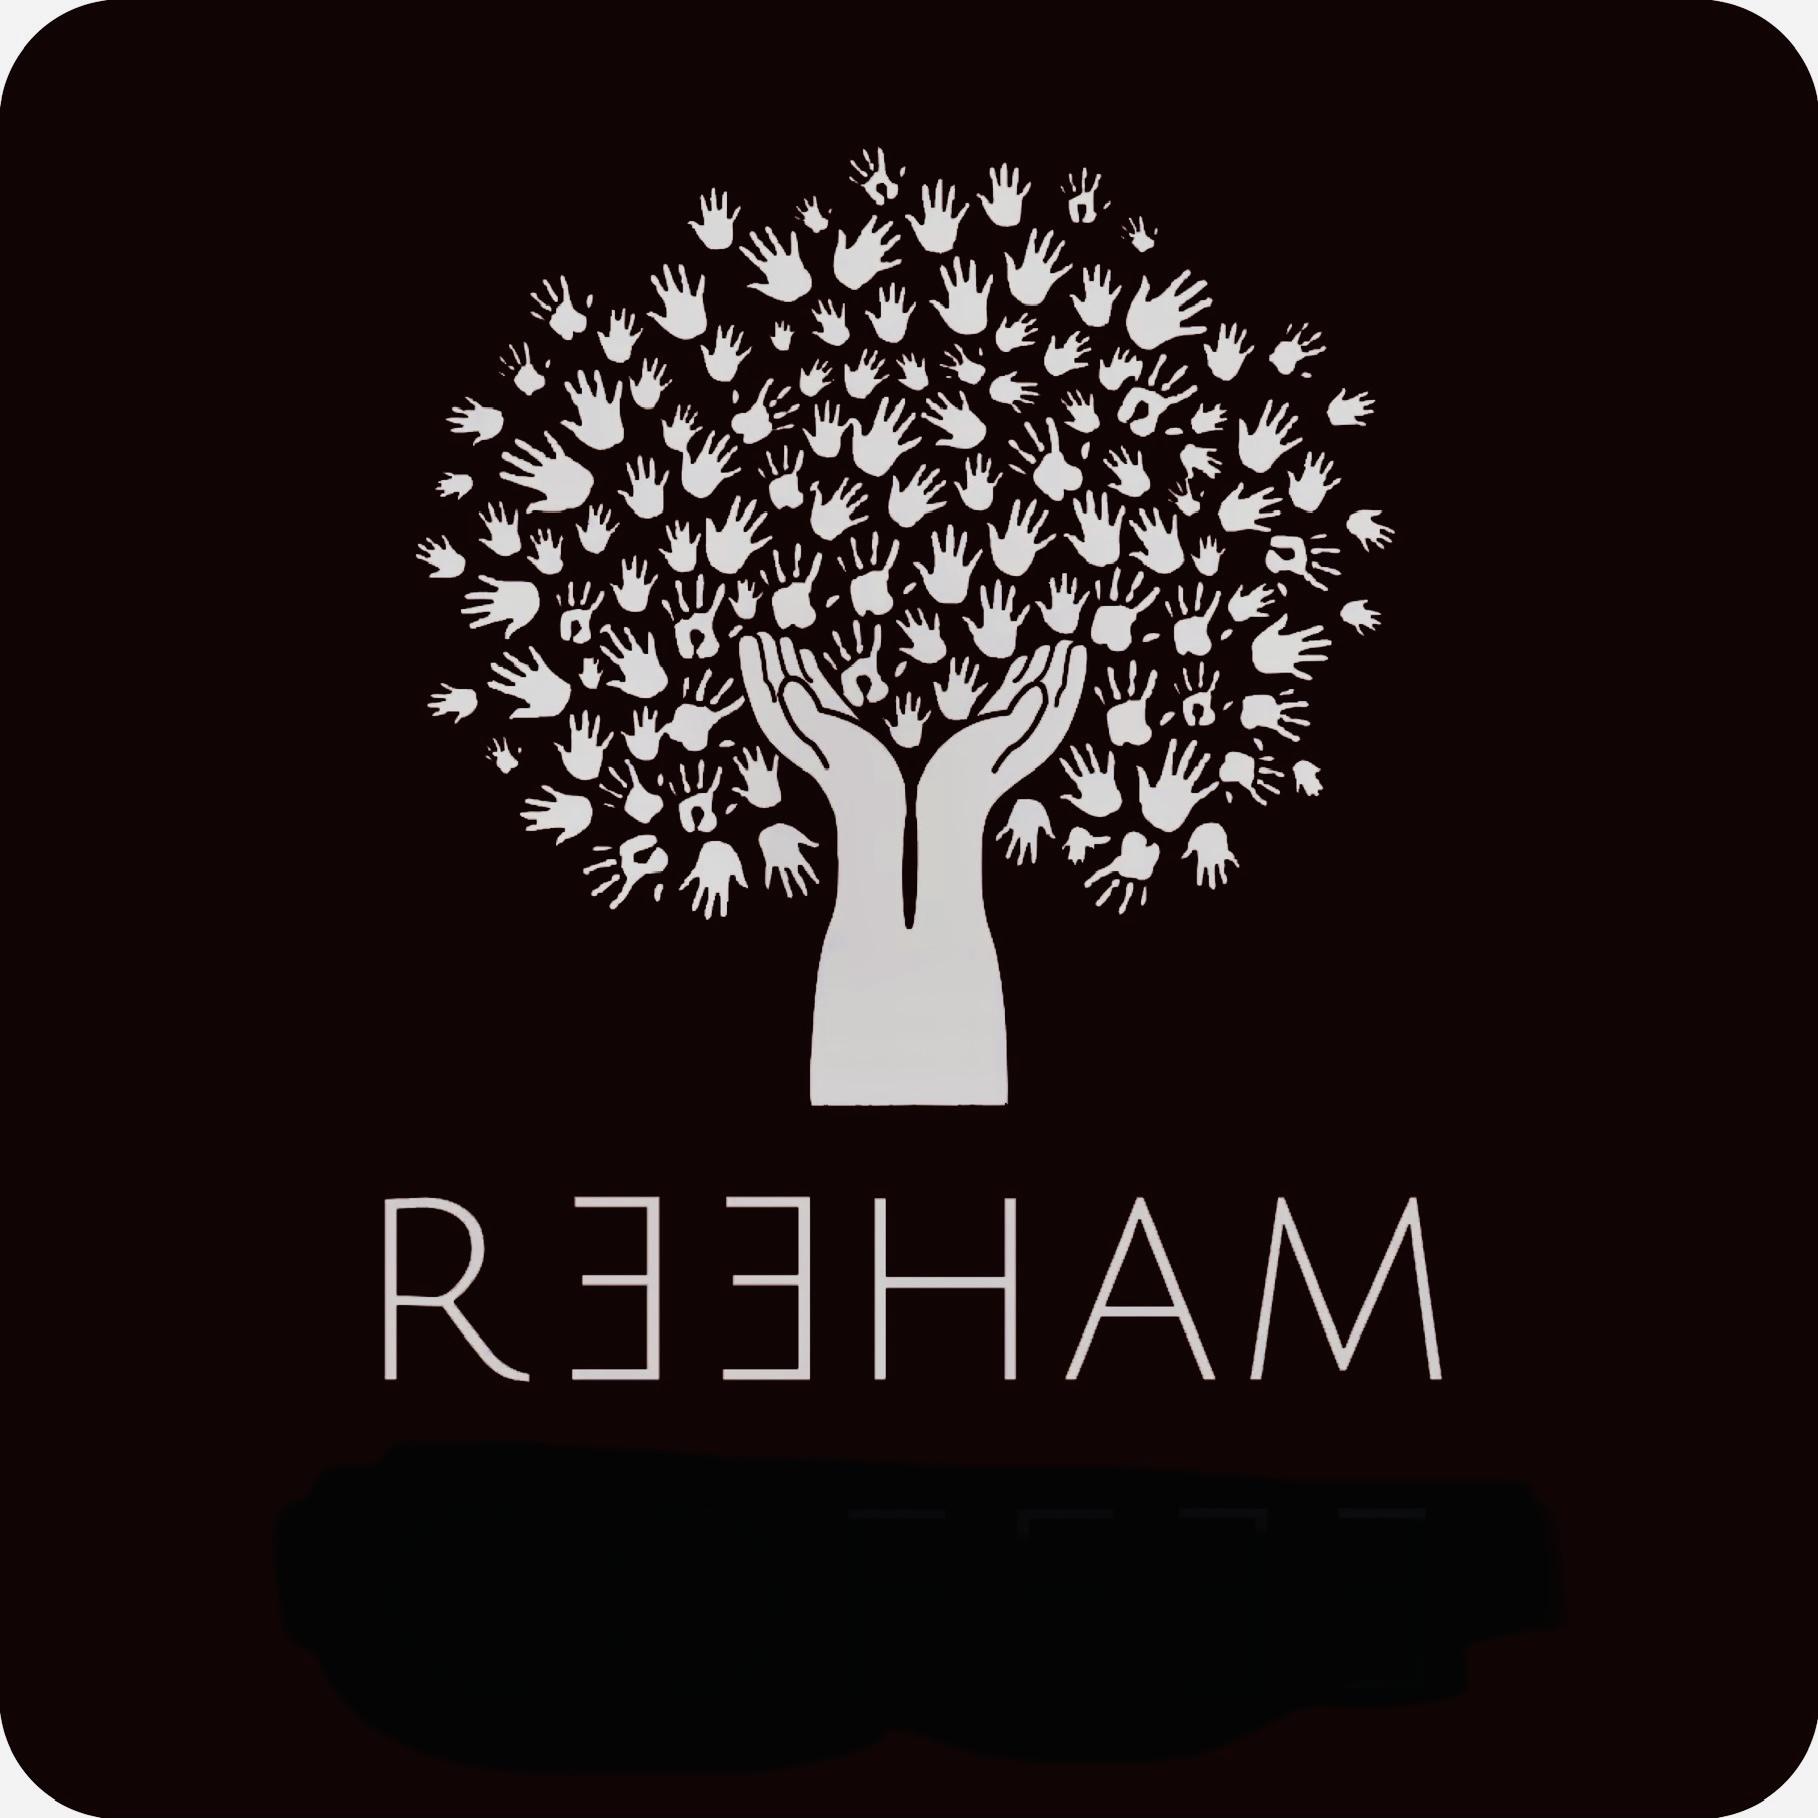 Reeham Coffee / startup from Berlin / Background